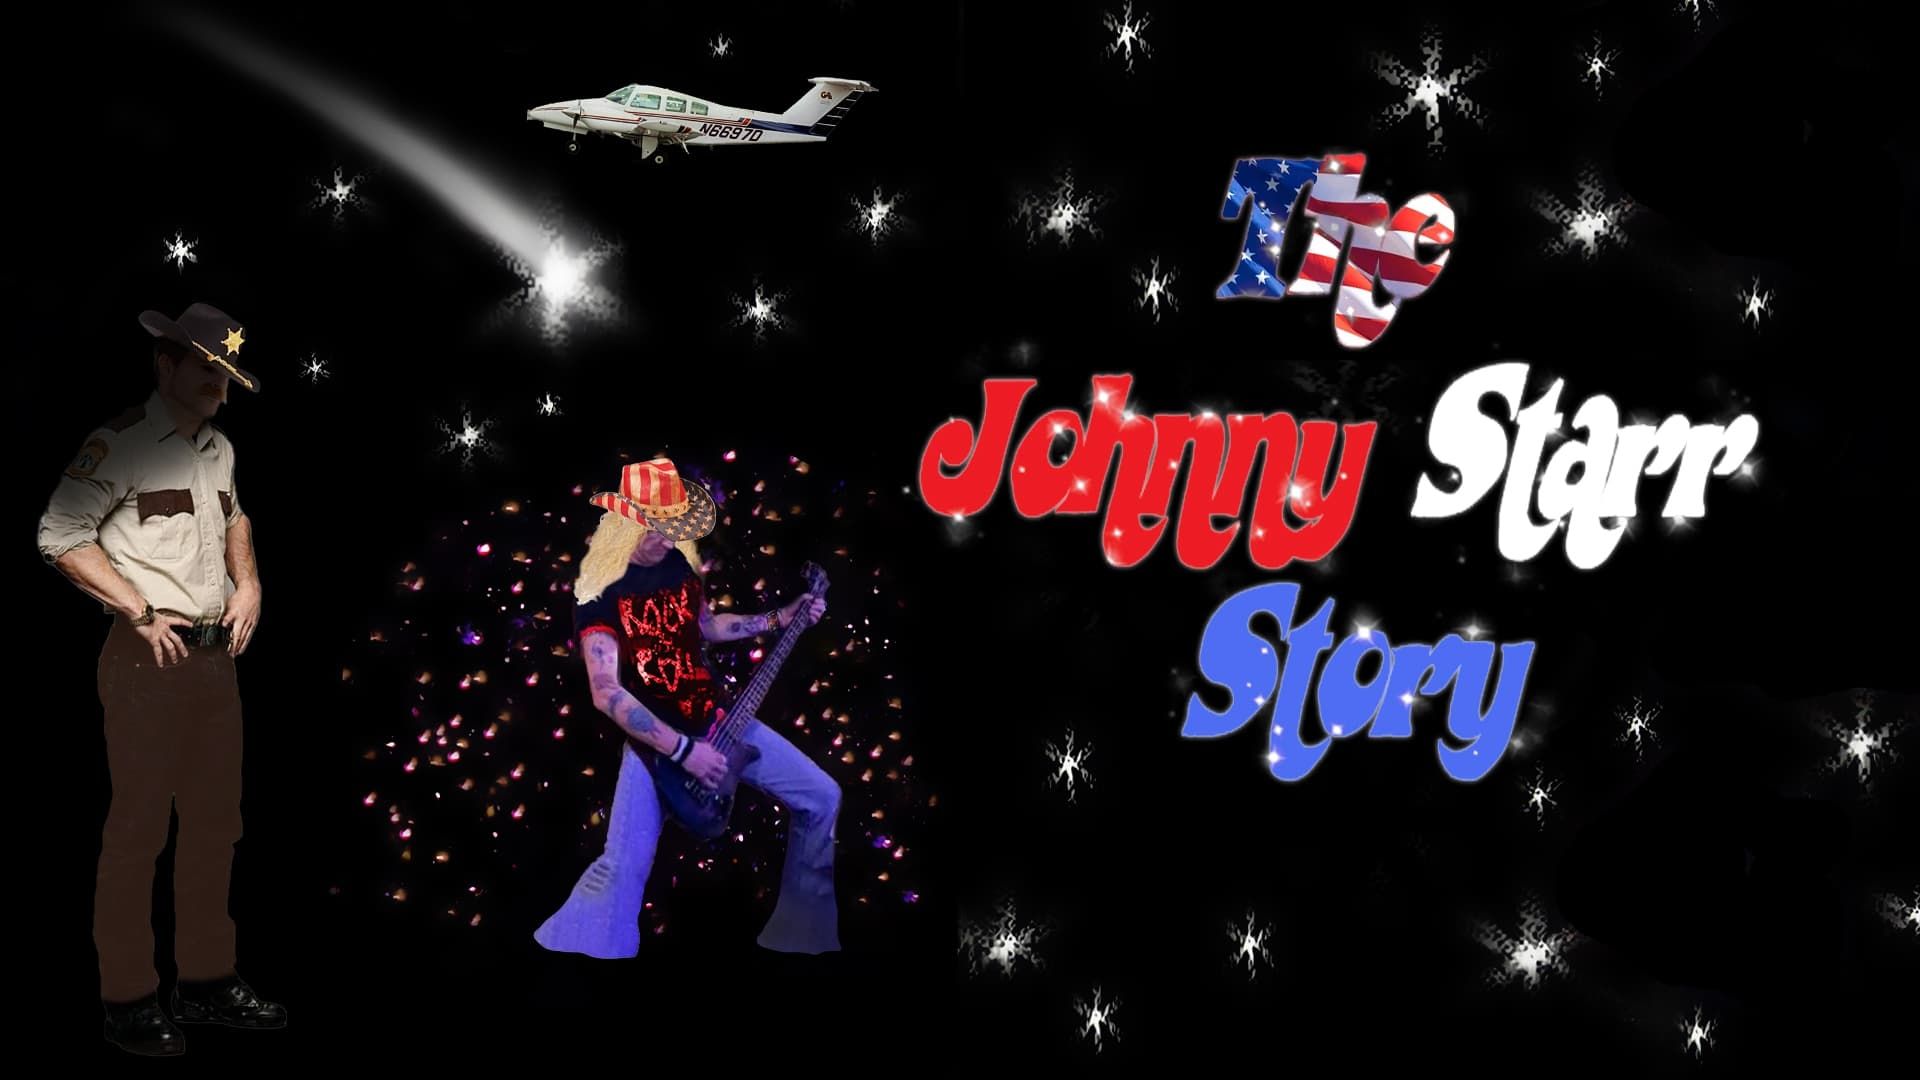 The Johnny Starr Story background